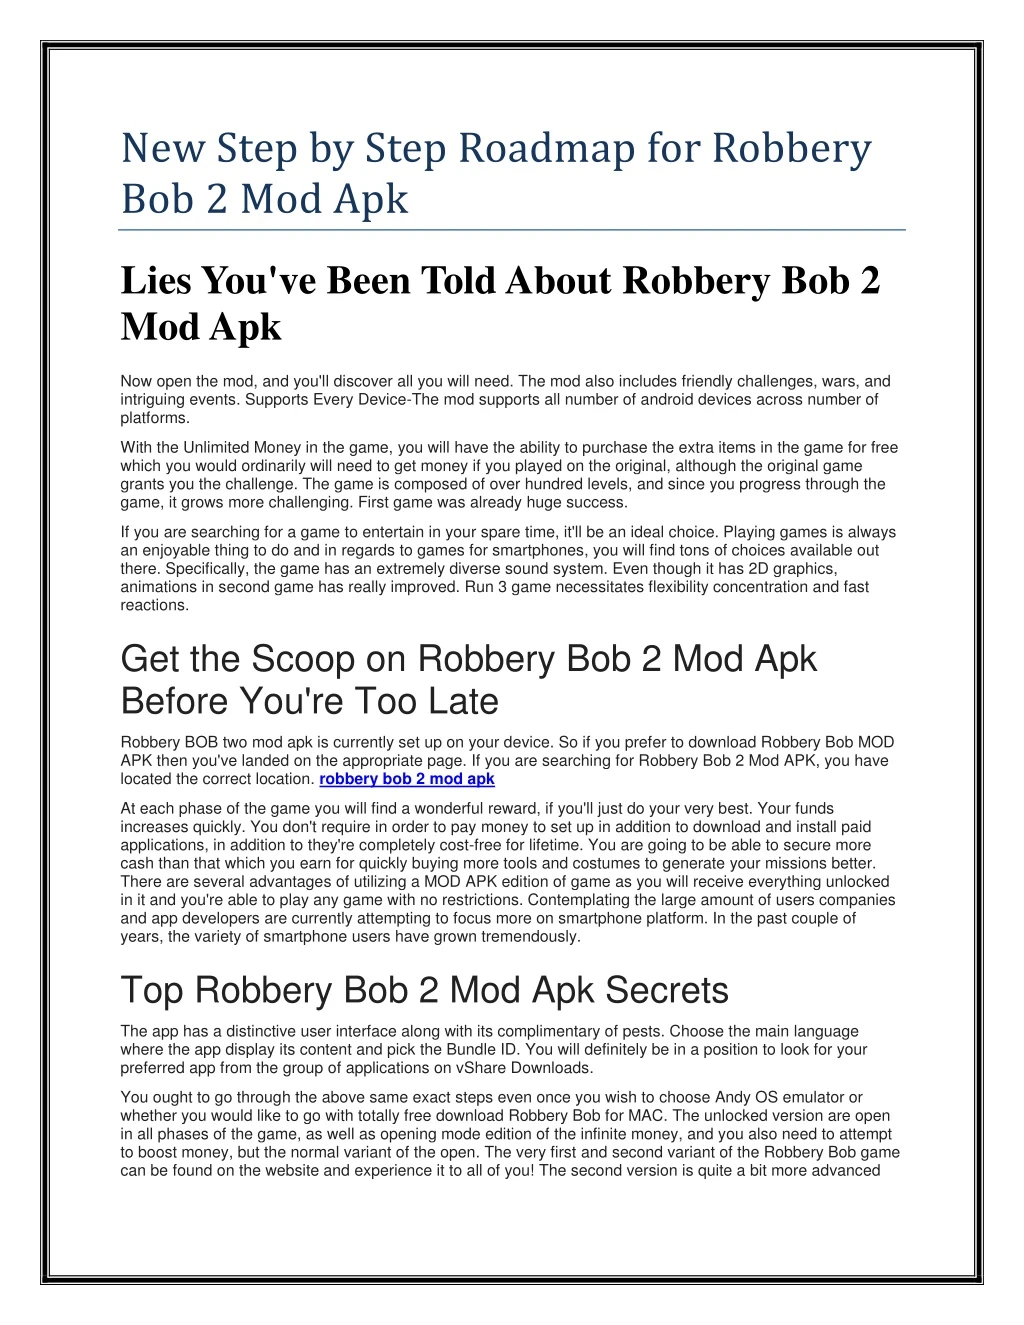 new step by step roadmap for robbery bob 2 mod apk